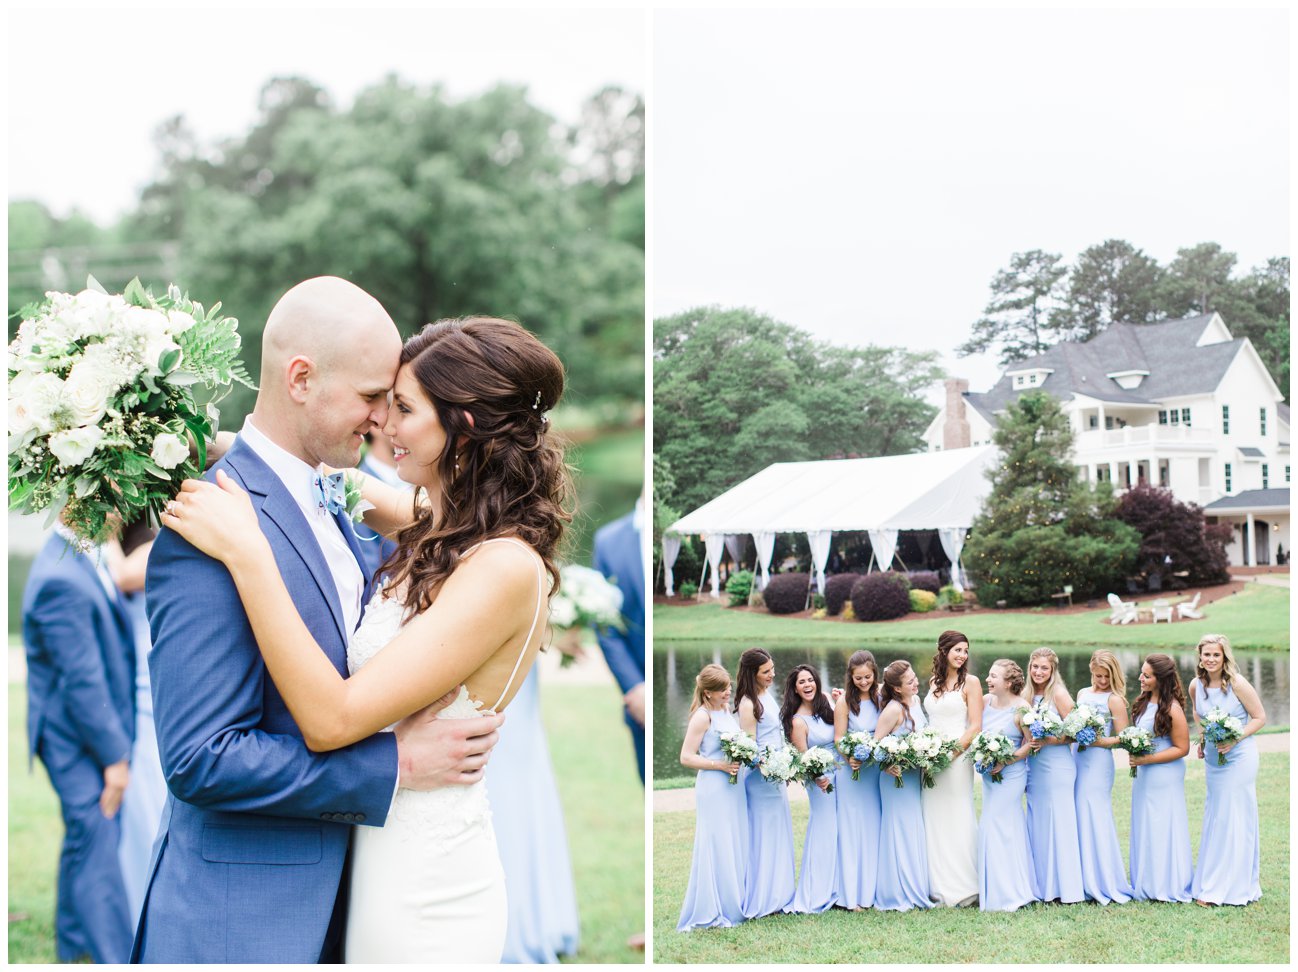 Blue and Navy wedding